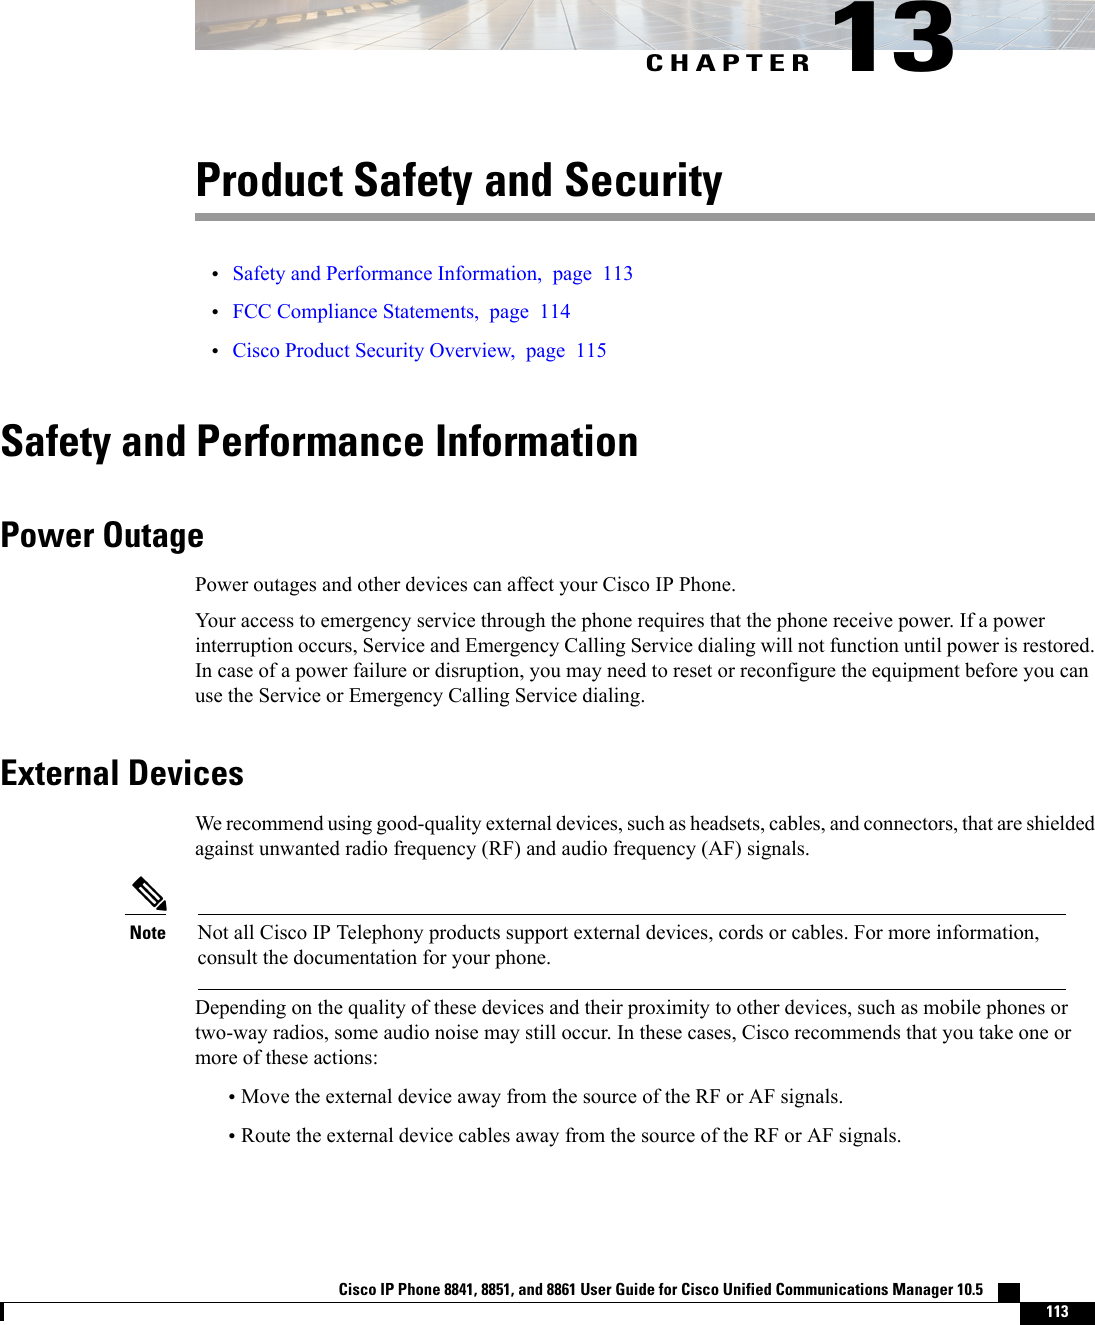 CHAPTER 13Product Safety and Security•Safety and Performance Information, page 113•FCC Compliance Statements, page 114•Cisco Product Security Overview, page 115Safety and Performance InformationPower OutagePower outages and other devices can affect your Cisco IP Phone.Your access to emergency service through the phone requires that the phone receive power. If a powerinterruption occurs, Service and Emergency Calling Service dialing will not function until power is restored.In case of a power failure or disruption, you may need to reset or reconfigure the equipment before you canuse the Service or Emergency Calling Service dialing.External DevicesWe recommend using good-quality external devices, such as headsets, cables, and connectors, that are shieldedagainst unwanted radio frequency (RF) and audio frequency (AF) signals.Not all Cisco IP Telephony products support external devices, cords or cables. For more information,consult the documentation for your phone.NoteDepending on the quality of these devices and their proximity to other devices, such as mobile phones ortwo-way radios, some audio noise may still occur. In these cases, Cisco recommends that you take one ormore of these actions:•Move the external device away from the source of the RF or AF signals.•Route the external device cables away from the source of the RF or AF signals.Cisco IP Phone 8841, 8851, and 8861 User Guide for Cisco Unified Communications Manager 10.5    113